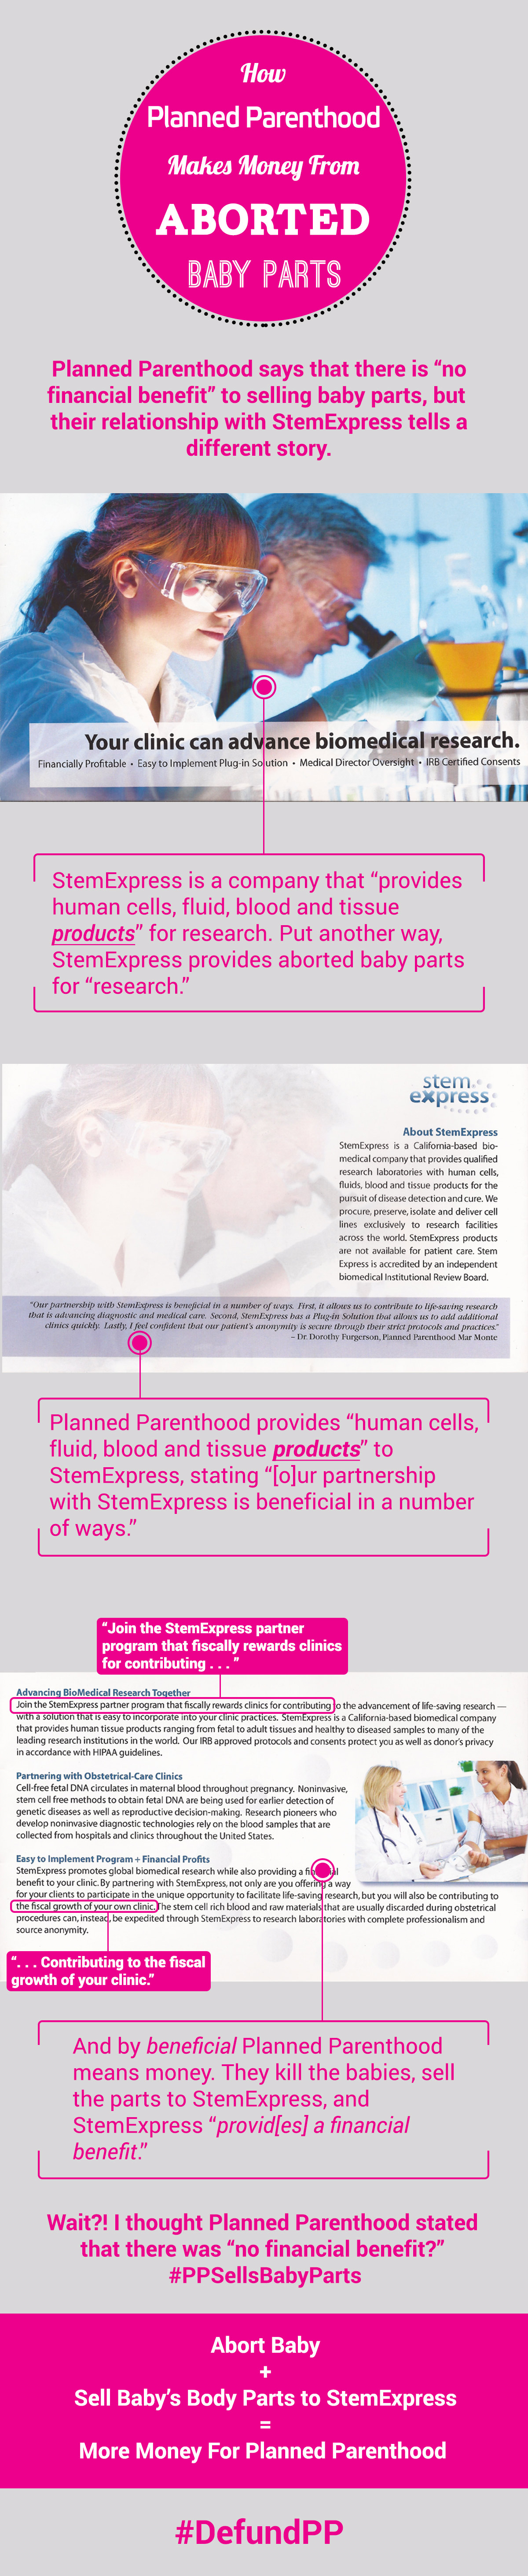 How Planned Parenthood Makes Money Selling Aborted Baby Parts